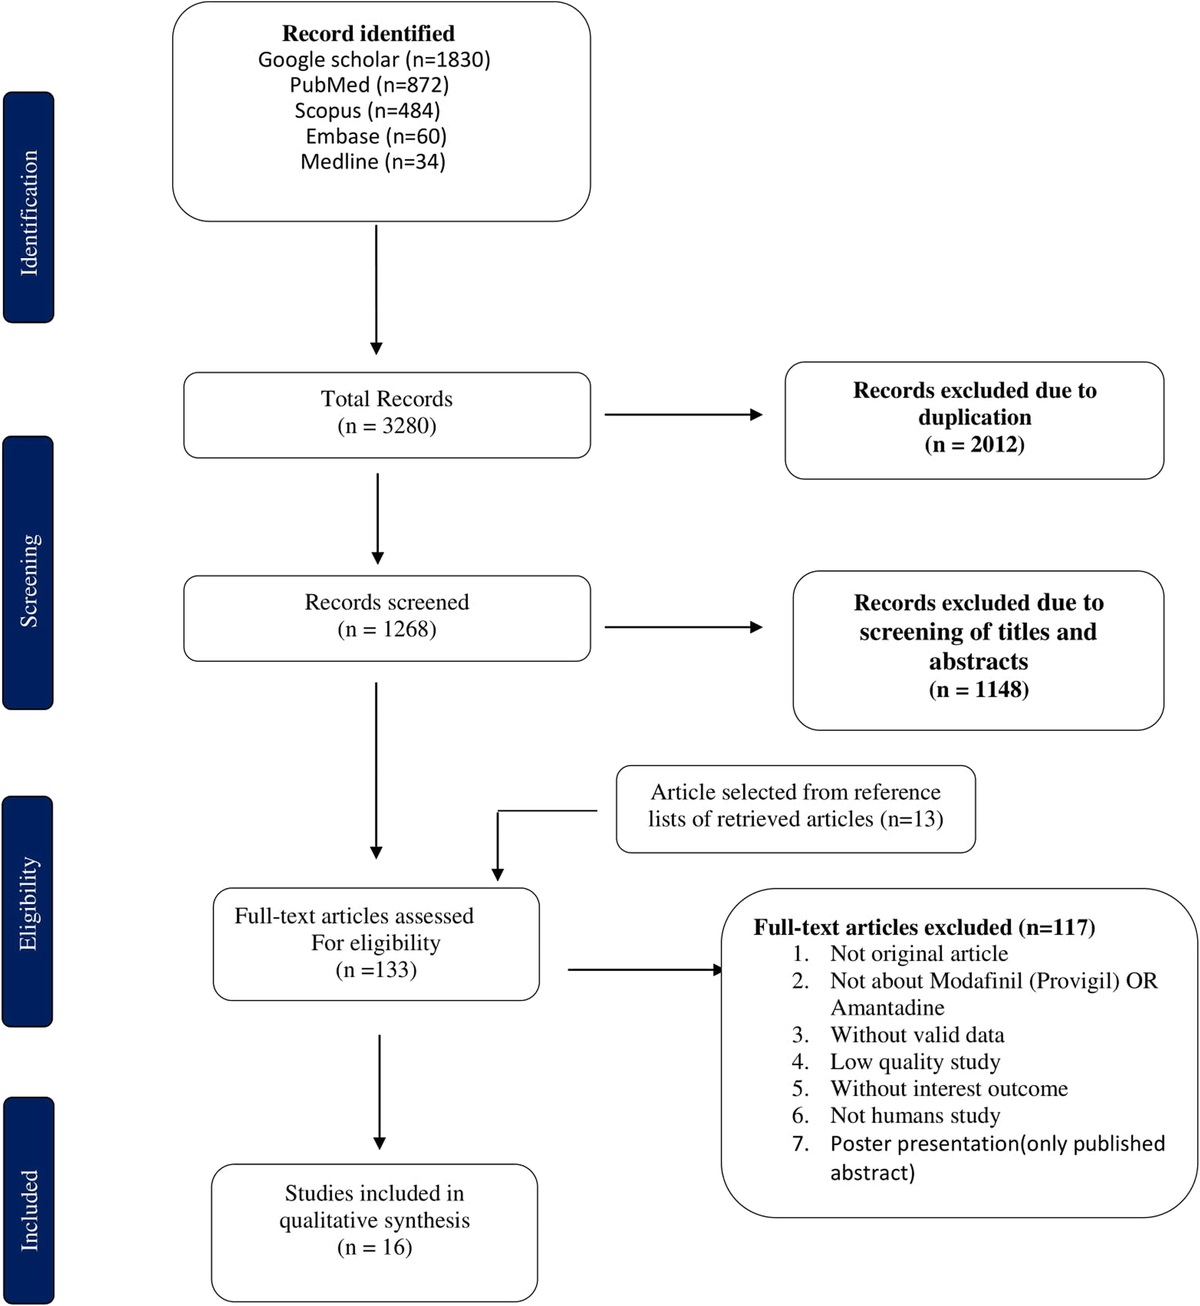 Consciousness Recovery in Traumatic Brain Injury: A Systematic Review Comparing Modafinil and Amantadine